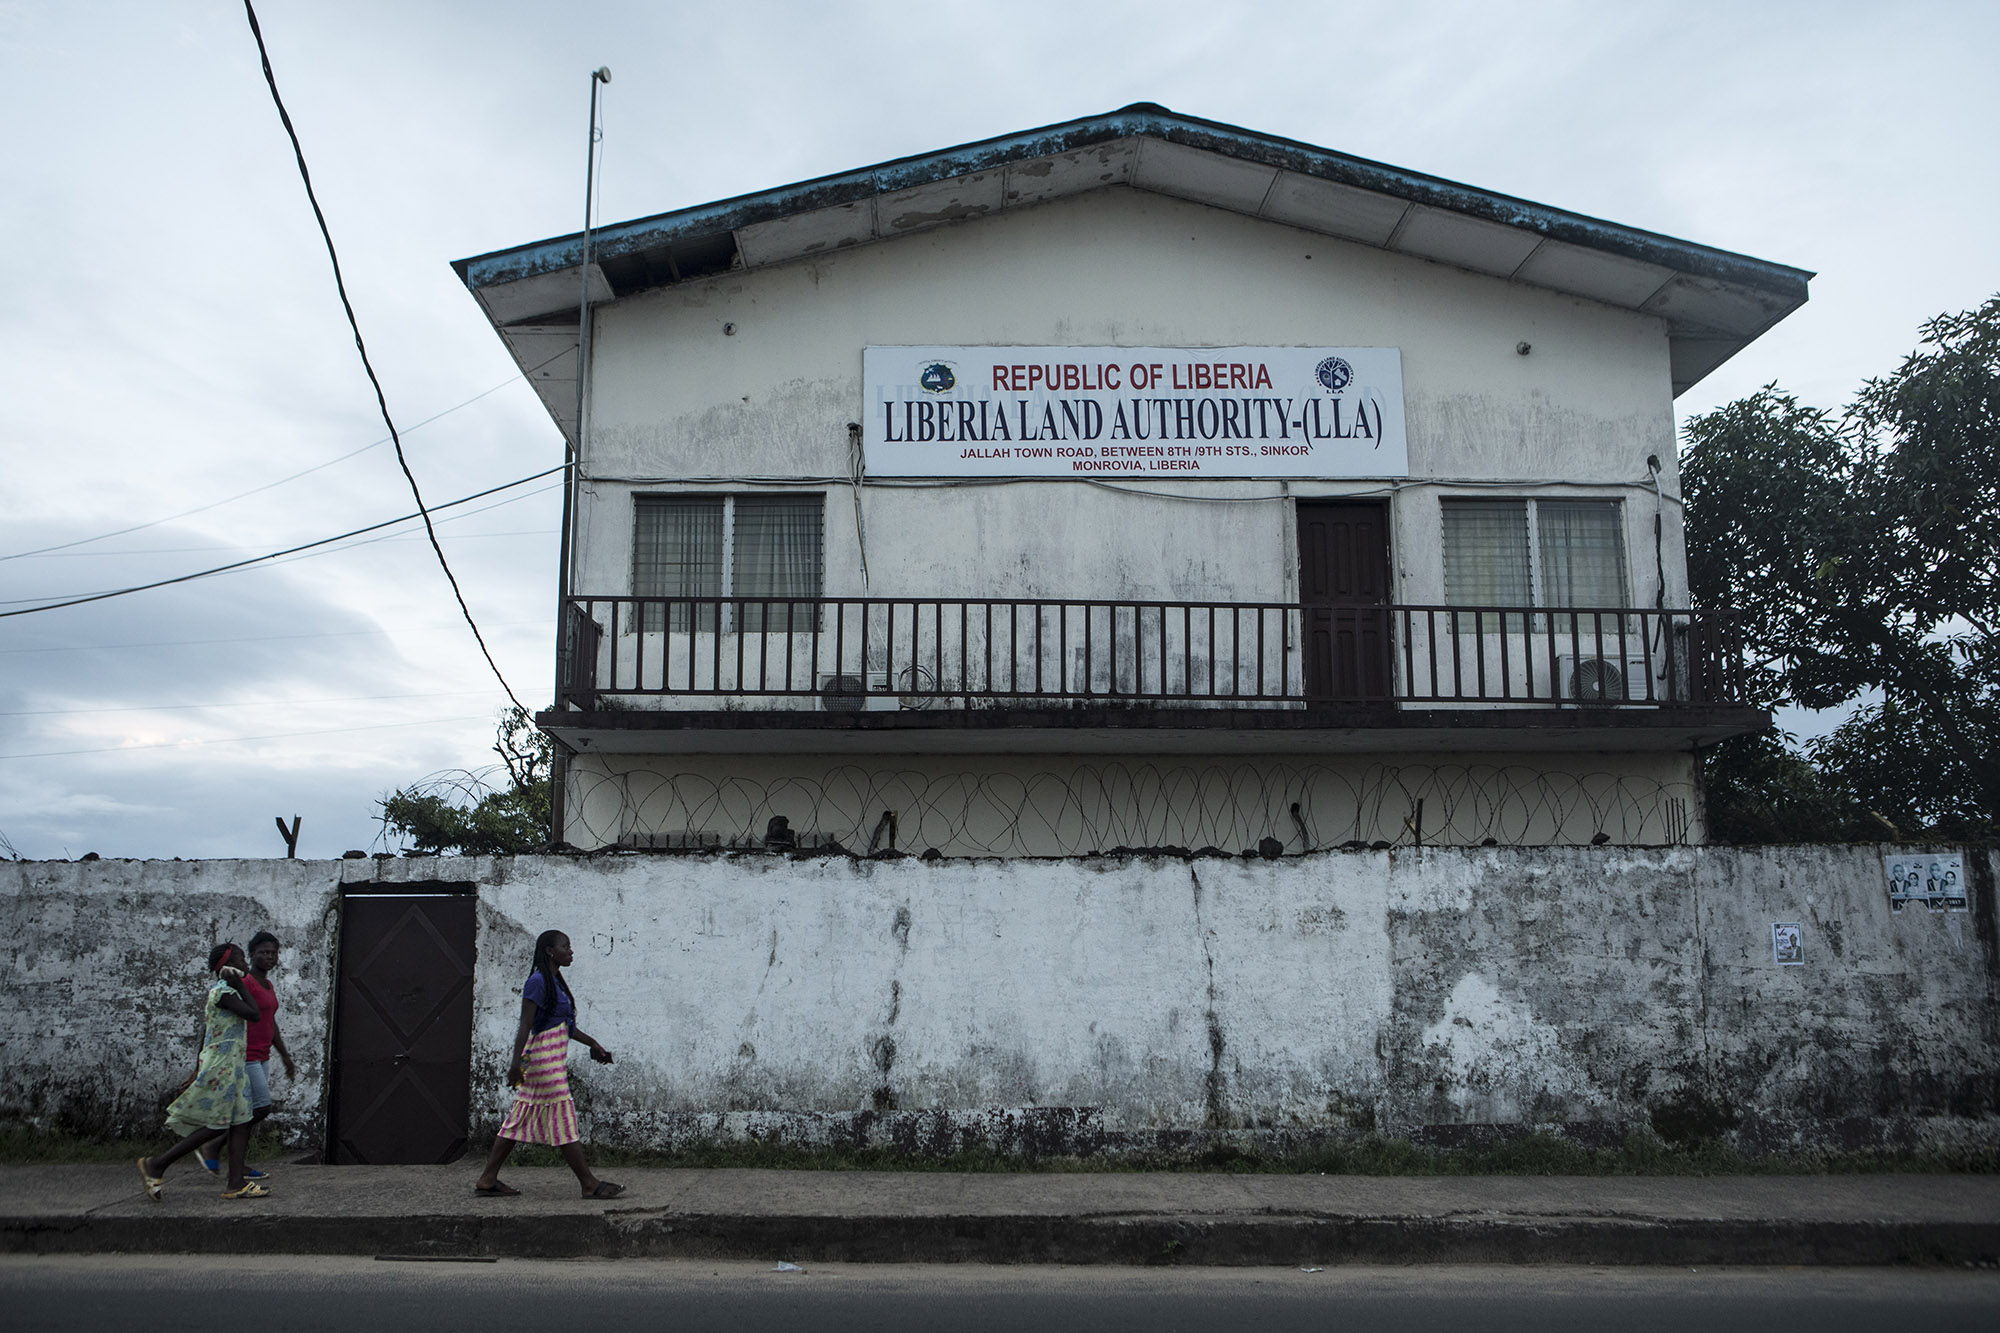  The Liberia Land Authority building located in Monrovia, Liberia.&nbsp;Photo by Sarah Grile.&nbsp; 